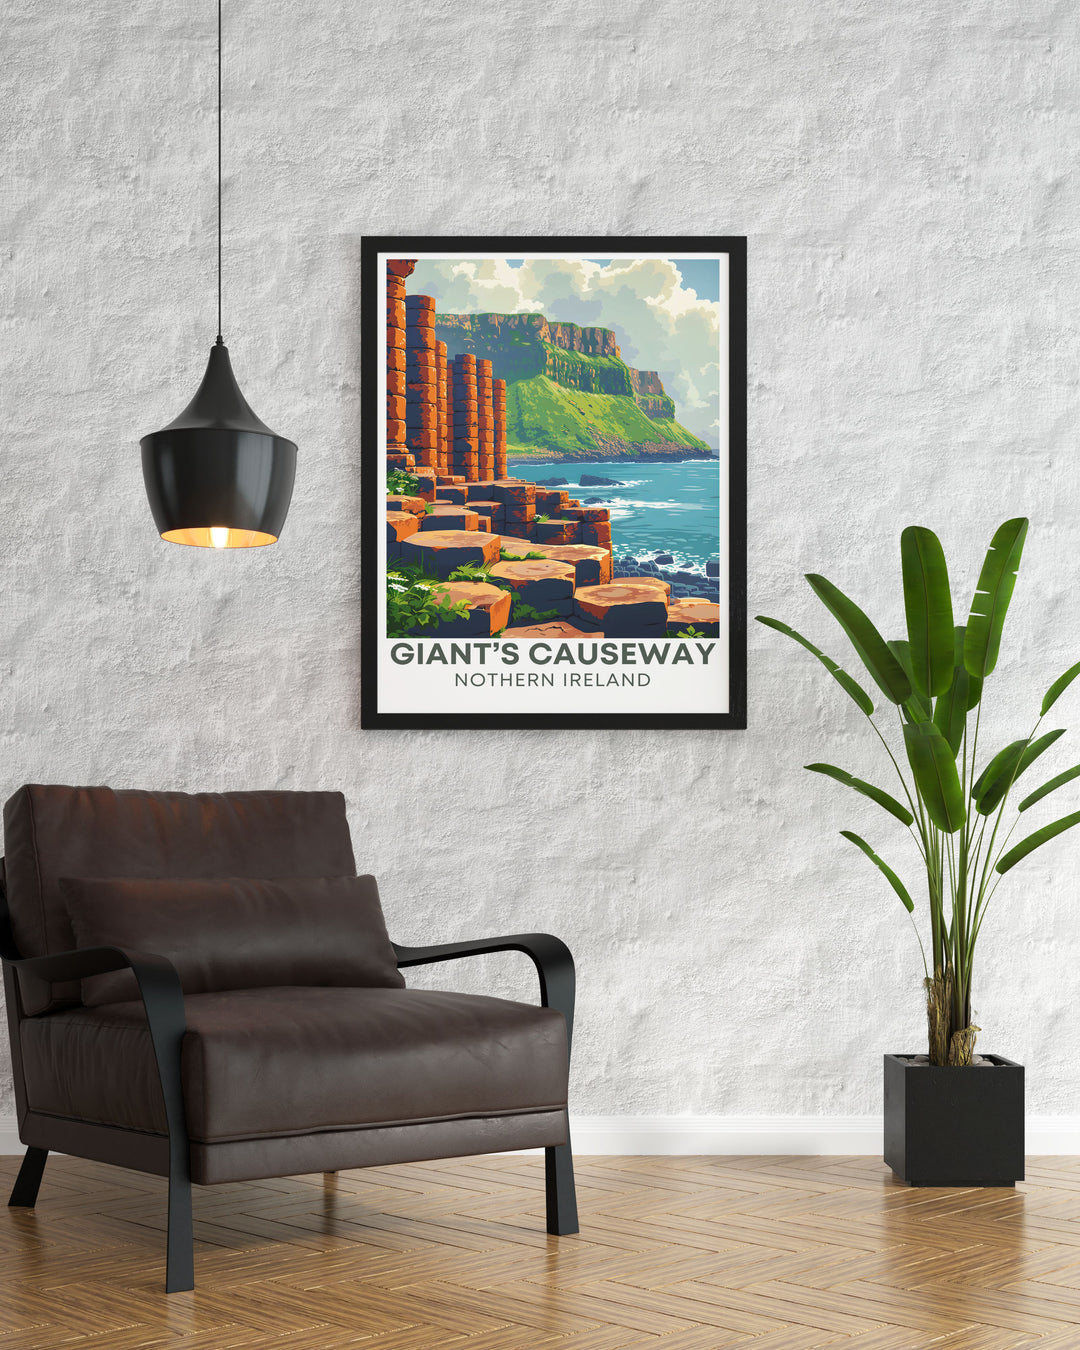 Home decor print illustrating the scenic beauty of Giants Causeway, showcasing the unique basalt columns and surrounding coastal scenery, ideal for bringing a touch of Irelands natural wonder into any home.